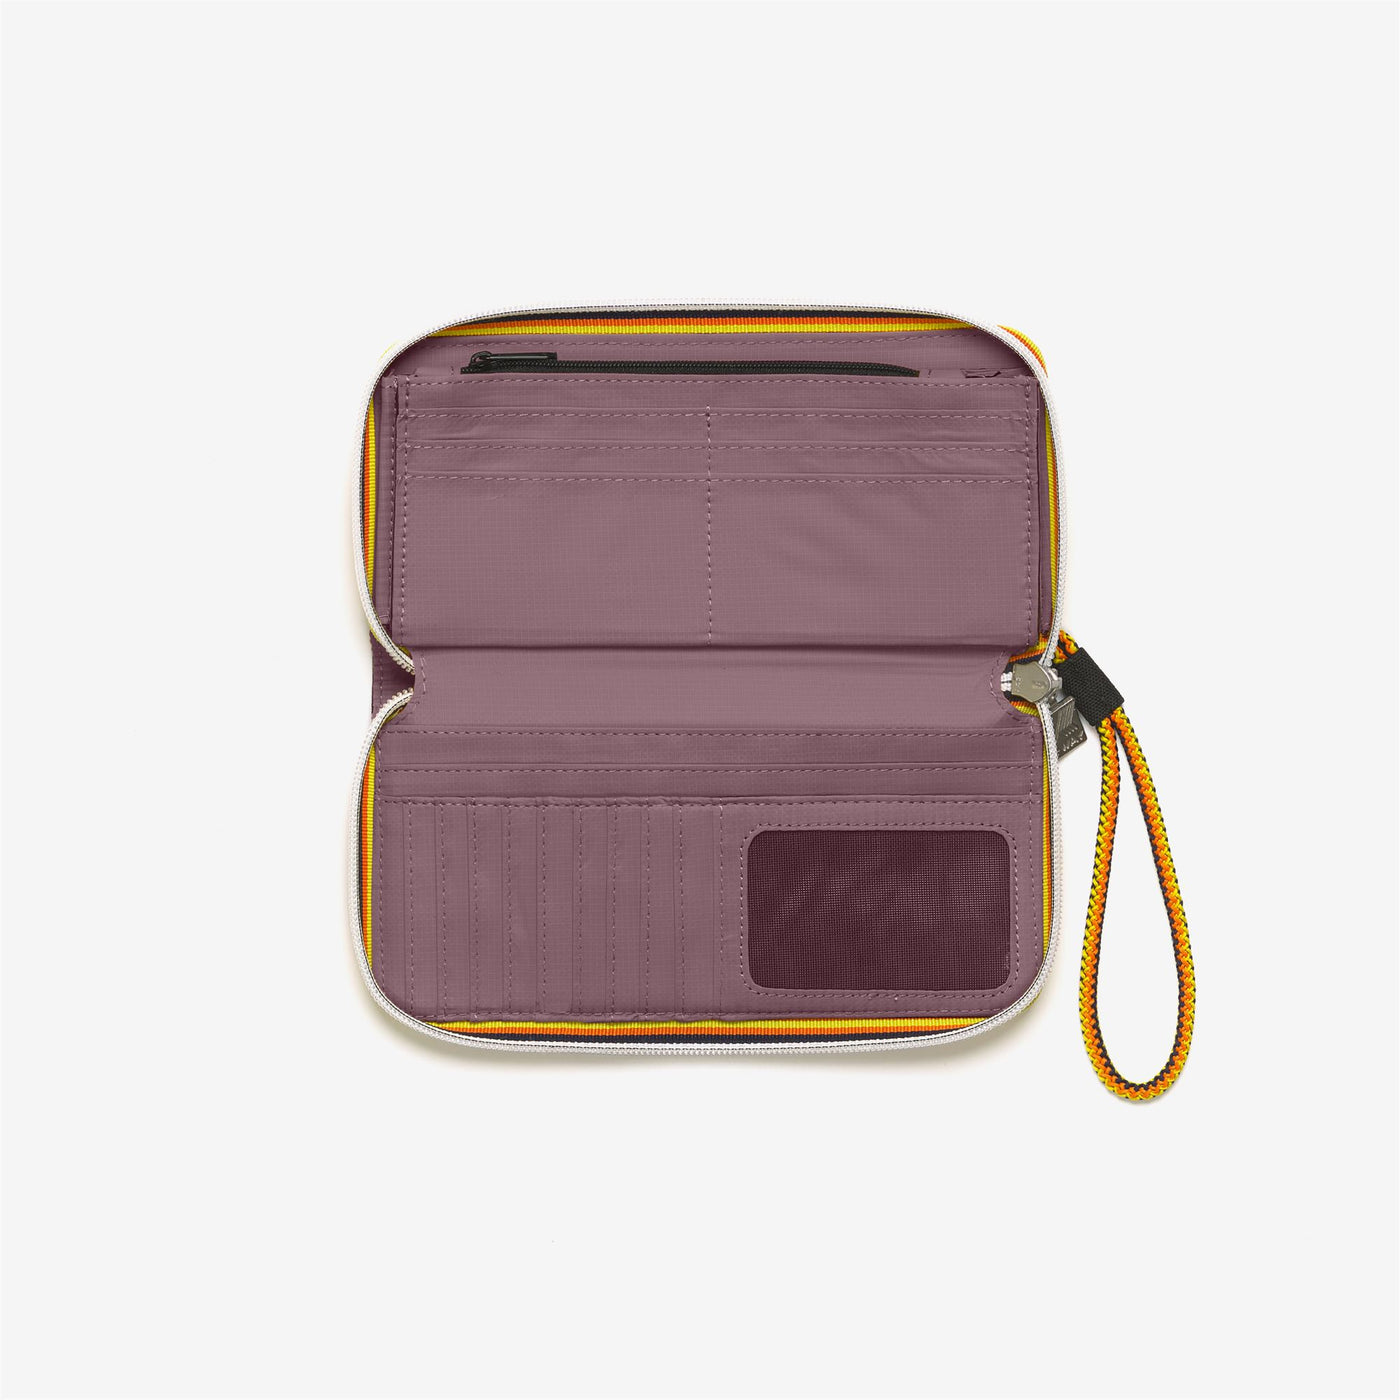 Small Accessories Unisex FLUY Wallet VIOLET DUSTY Dressed Side (jpg Rgb)		